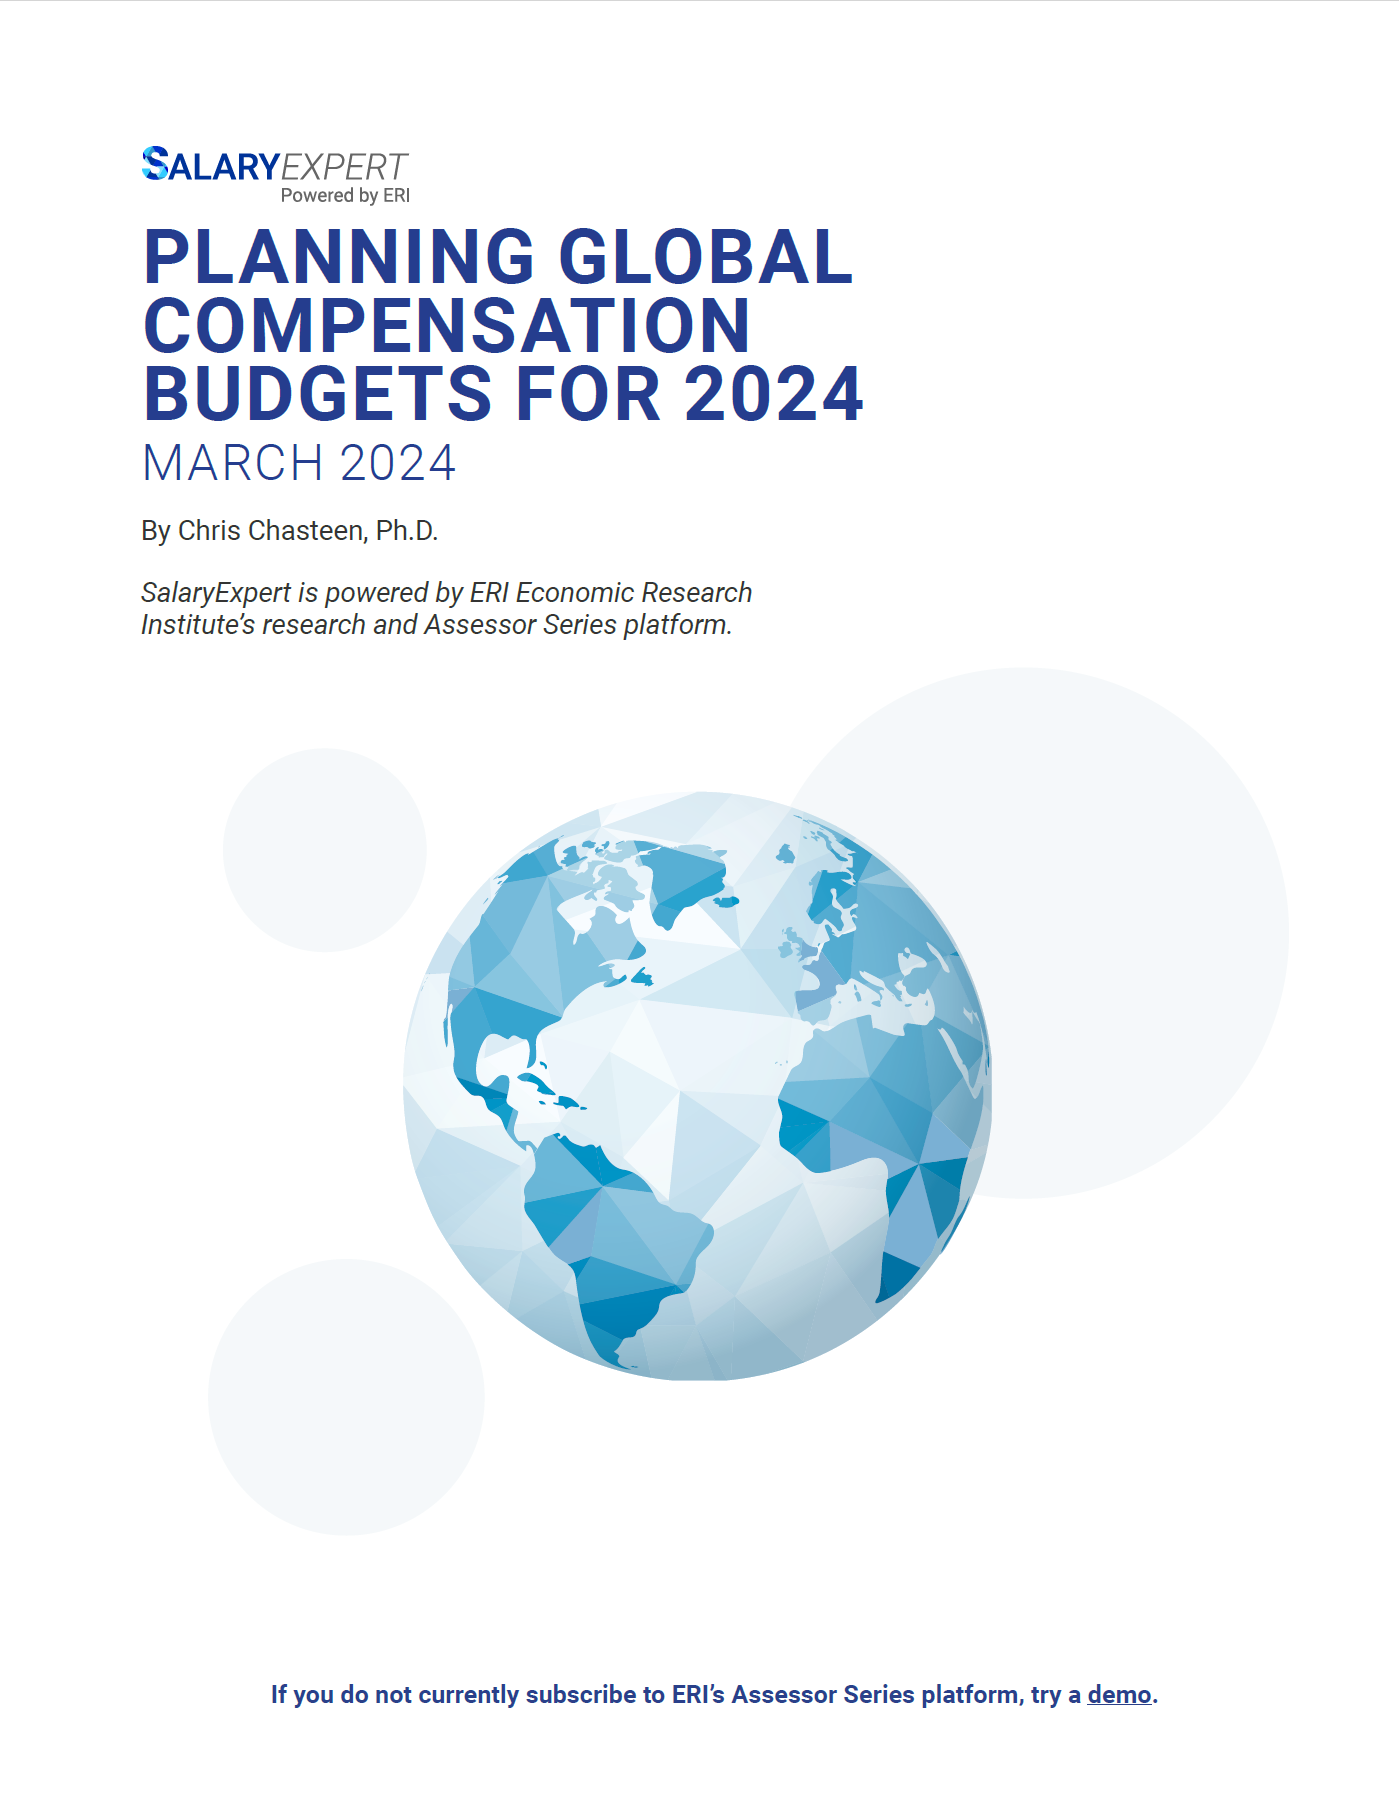 PlanningGlobalCompensationBudgets_2024 March update_COVER